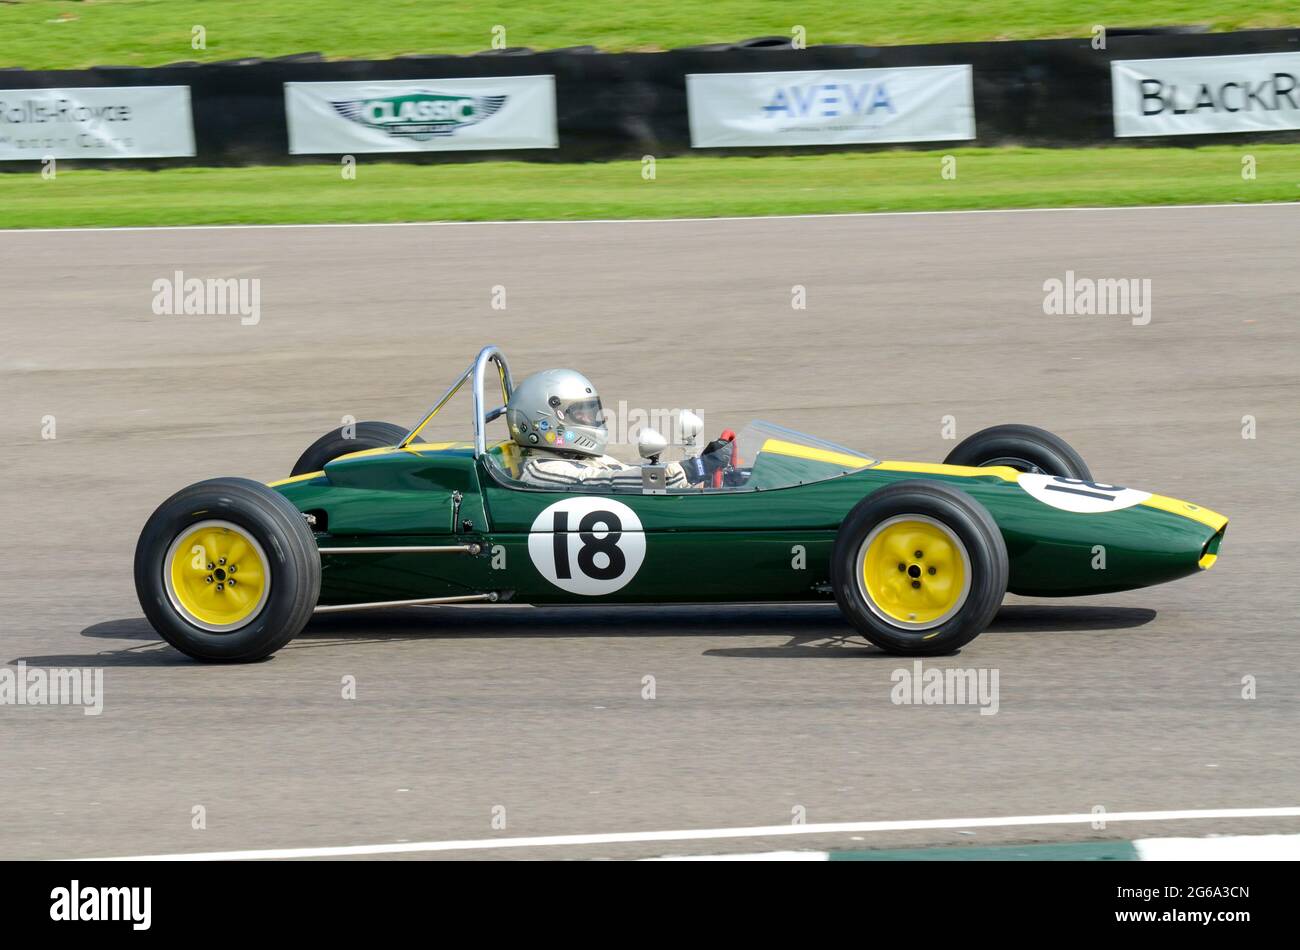 Lotus Ford 27 classic Formula Junior vintage racing car competing in the Chichester Cup at the Goodwood Revival historic event, UK. Driver Chris Locke Stock Photo